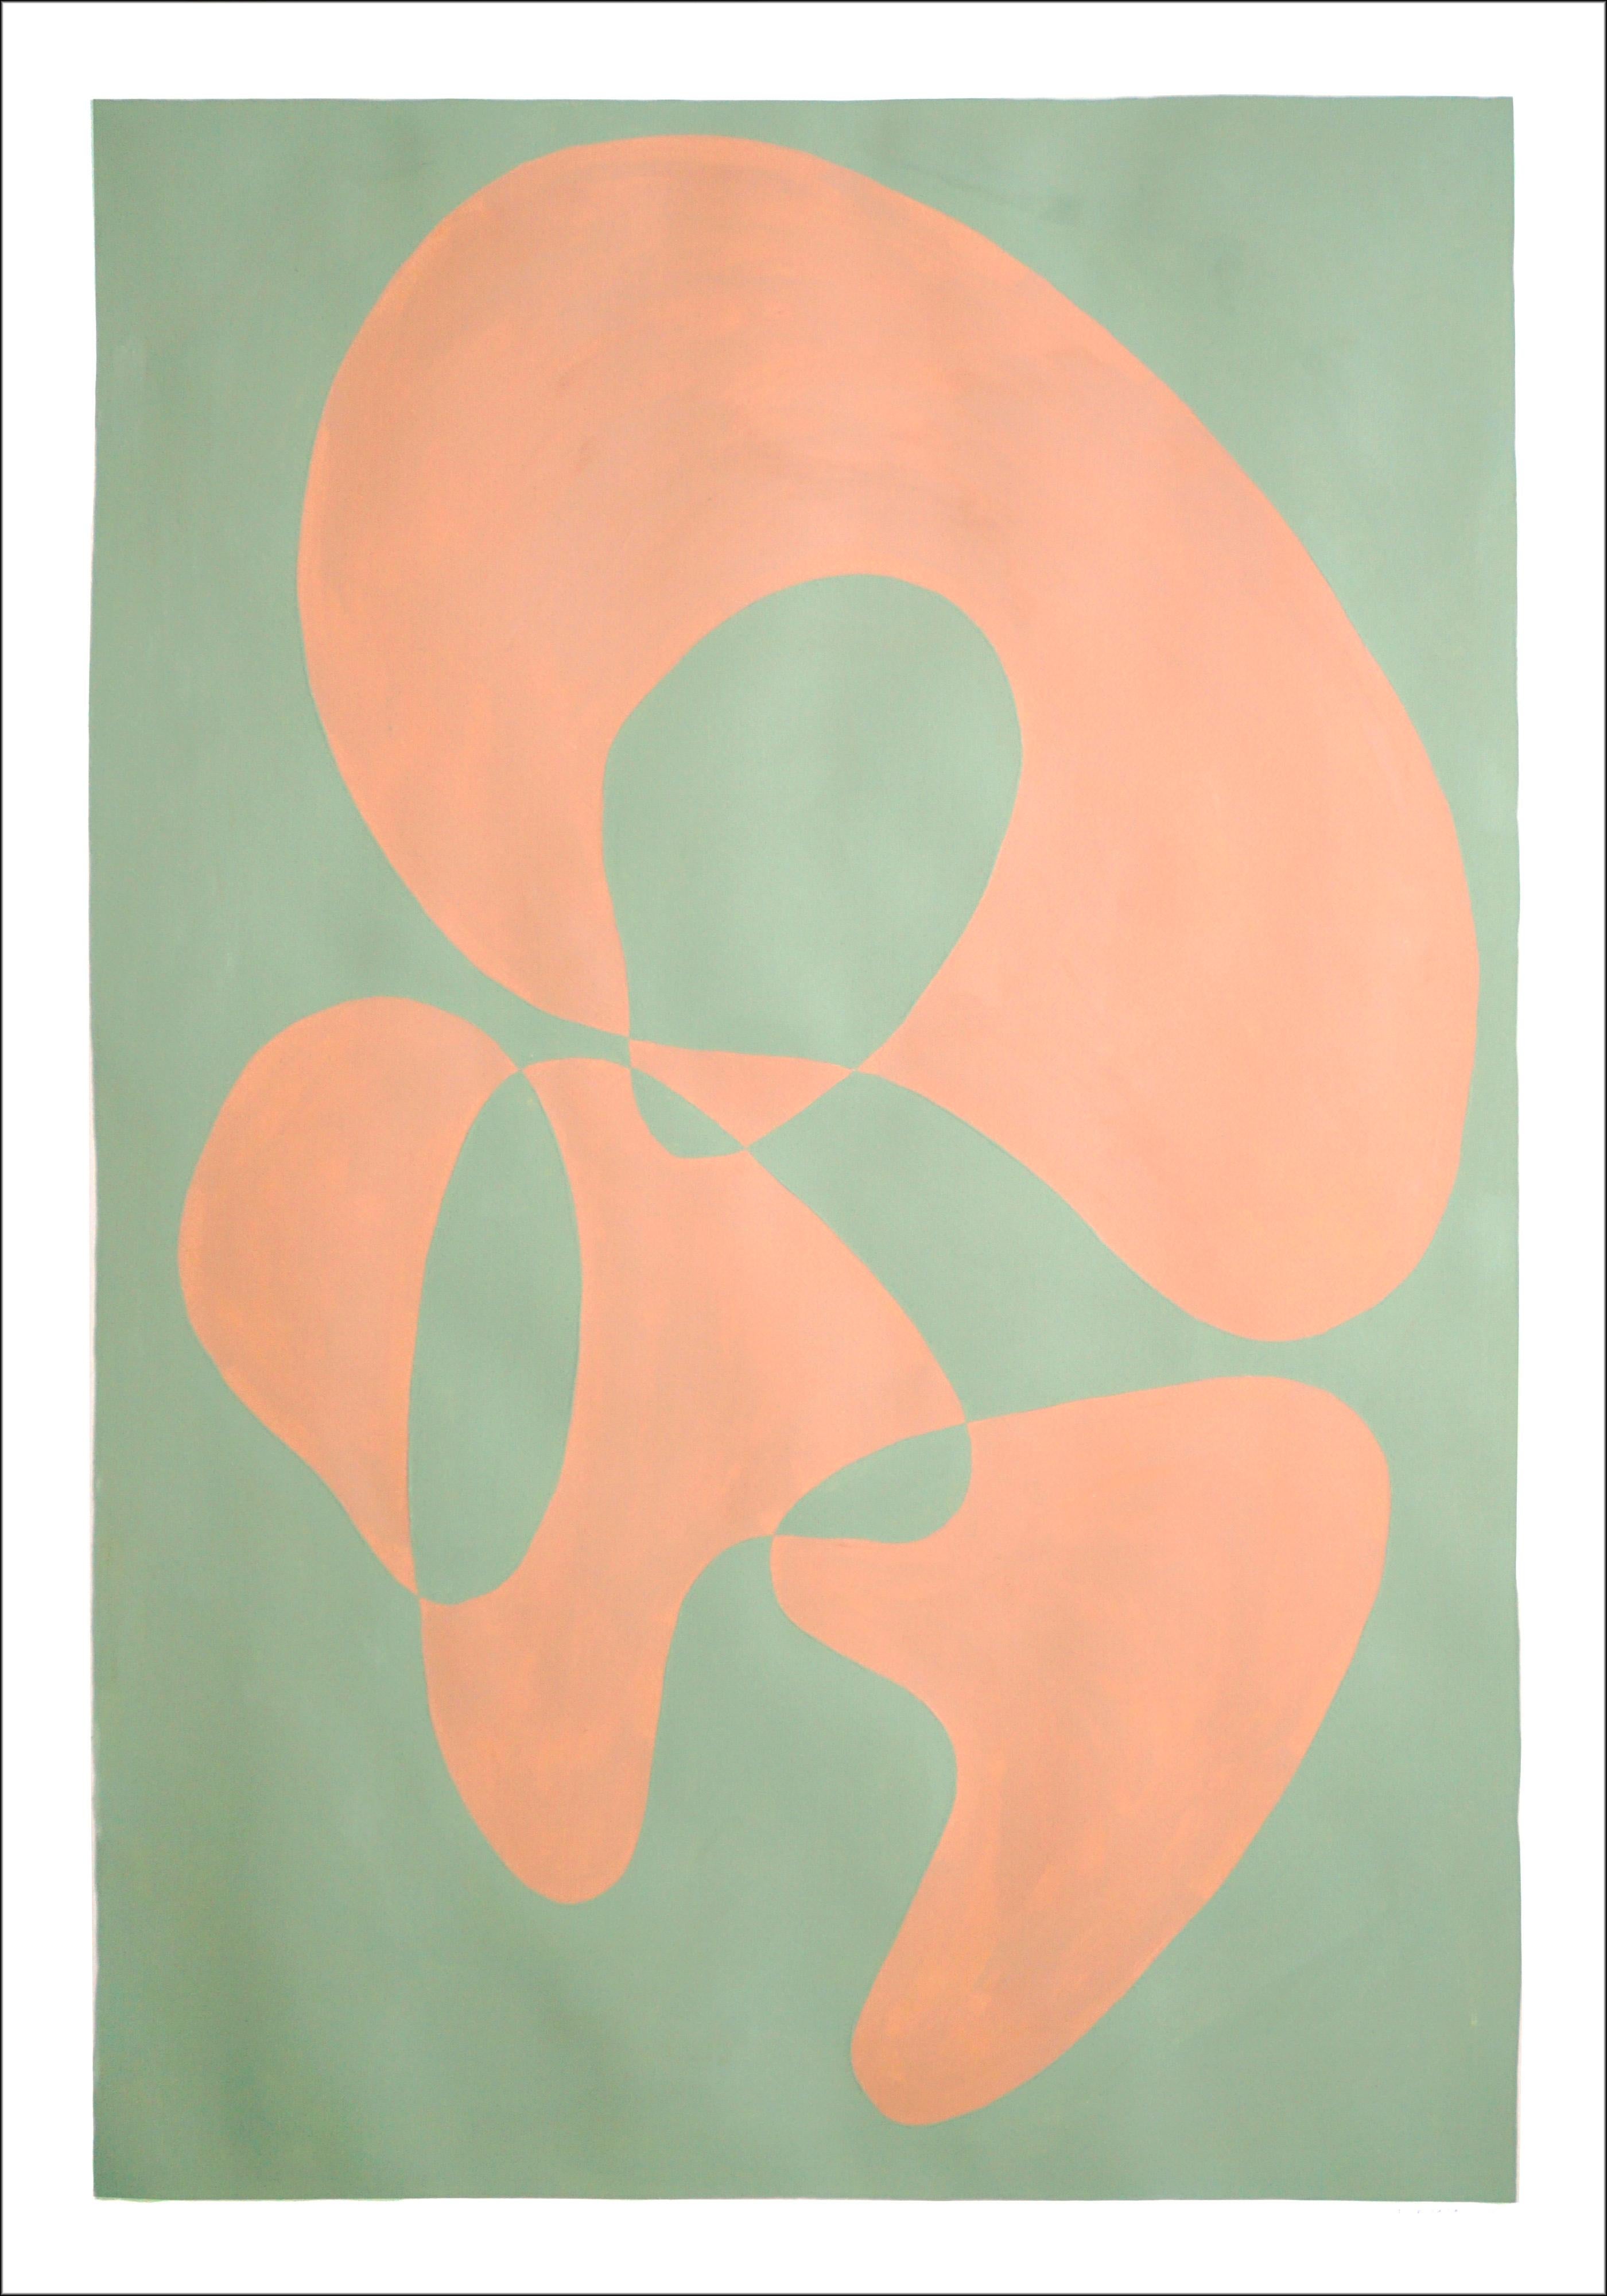 Bodies Moving Slowly, Abstract Figures Duo, Green and Tan, Pastel Tones Diptych - Modern Painting by Ryan Rivadeneyra